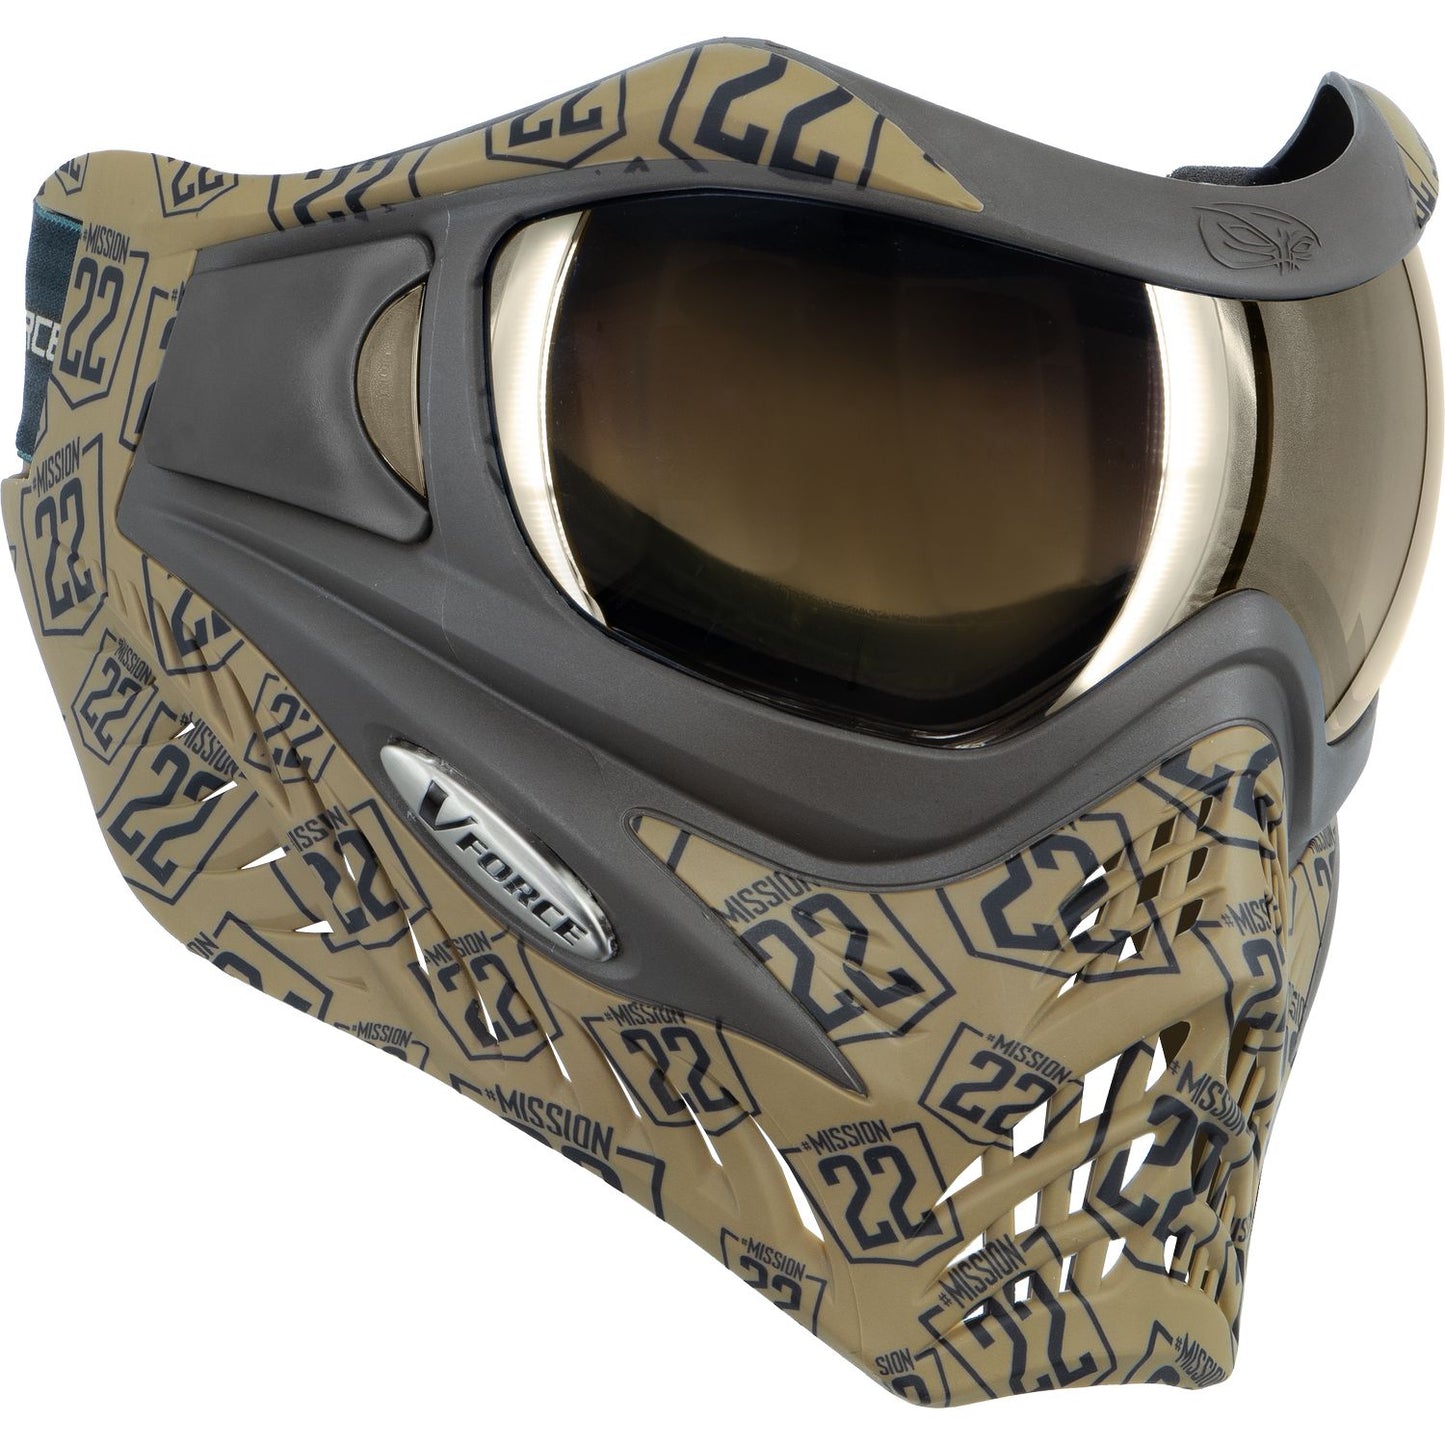 V-Force Grill SE Paintball Mask Goggle - Mission 22 w/ Quicksilver and Clear Lens